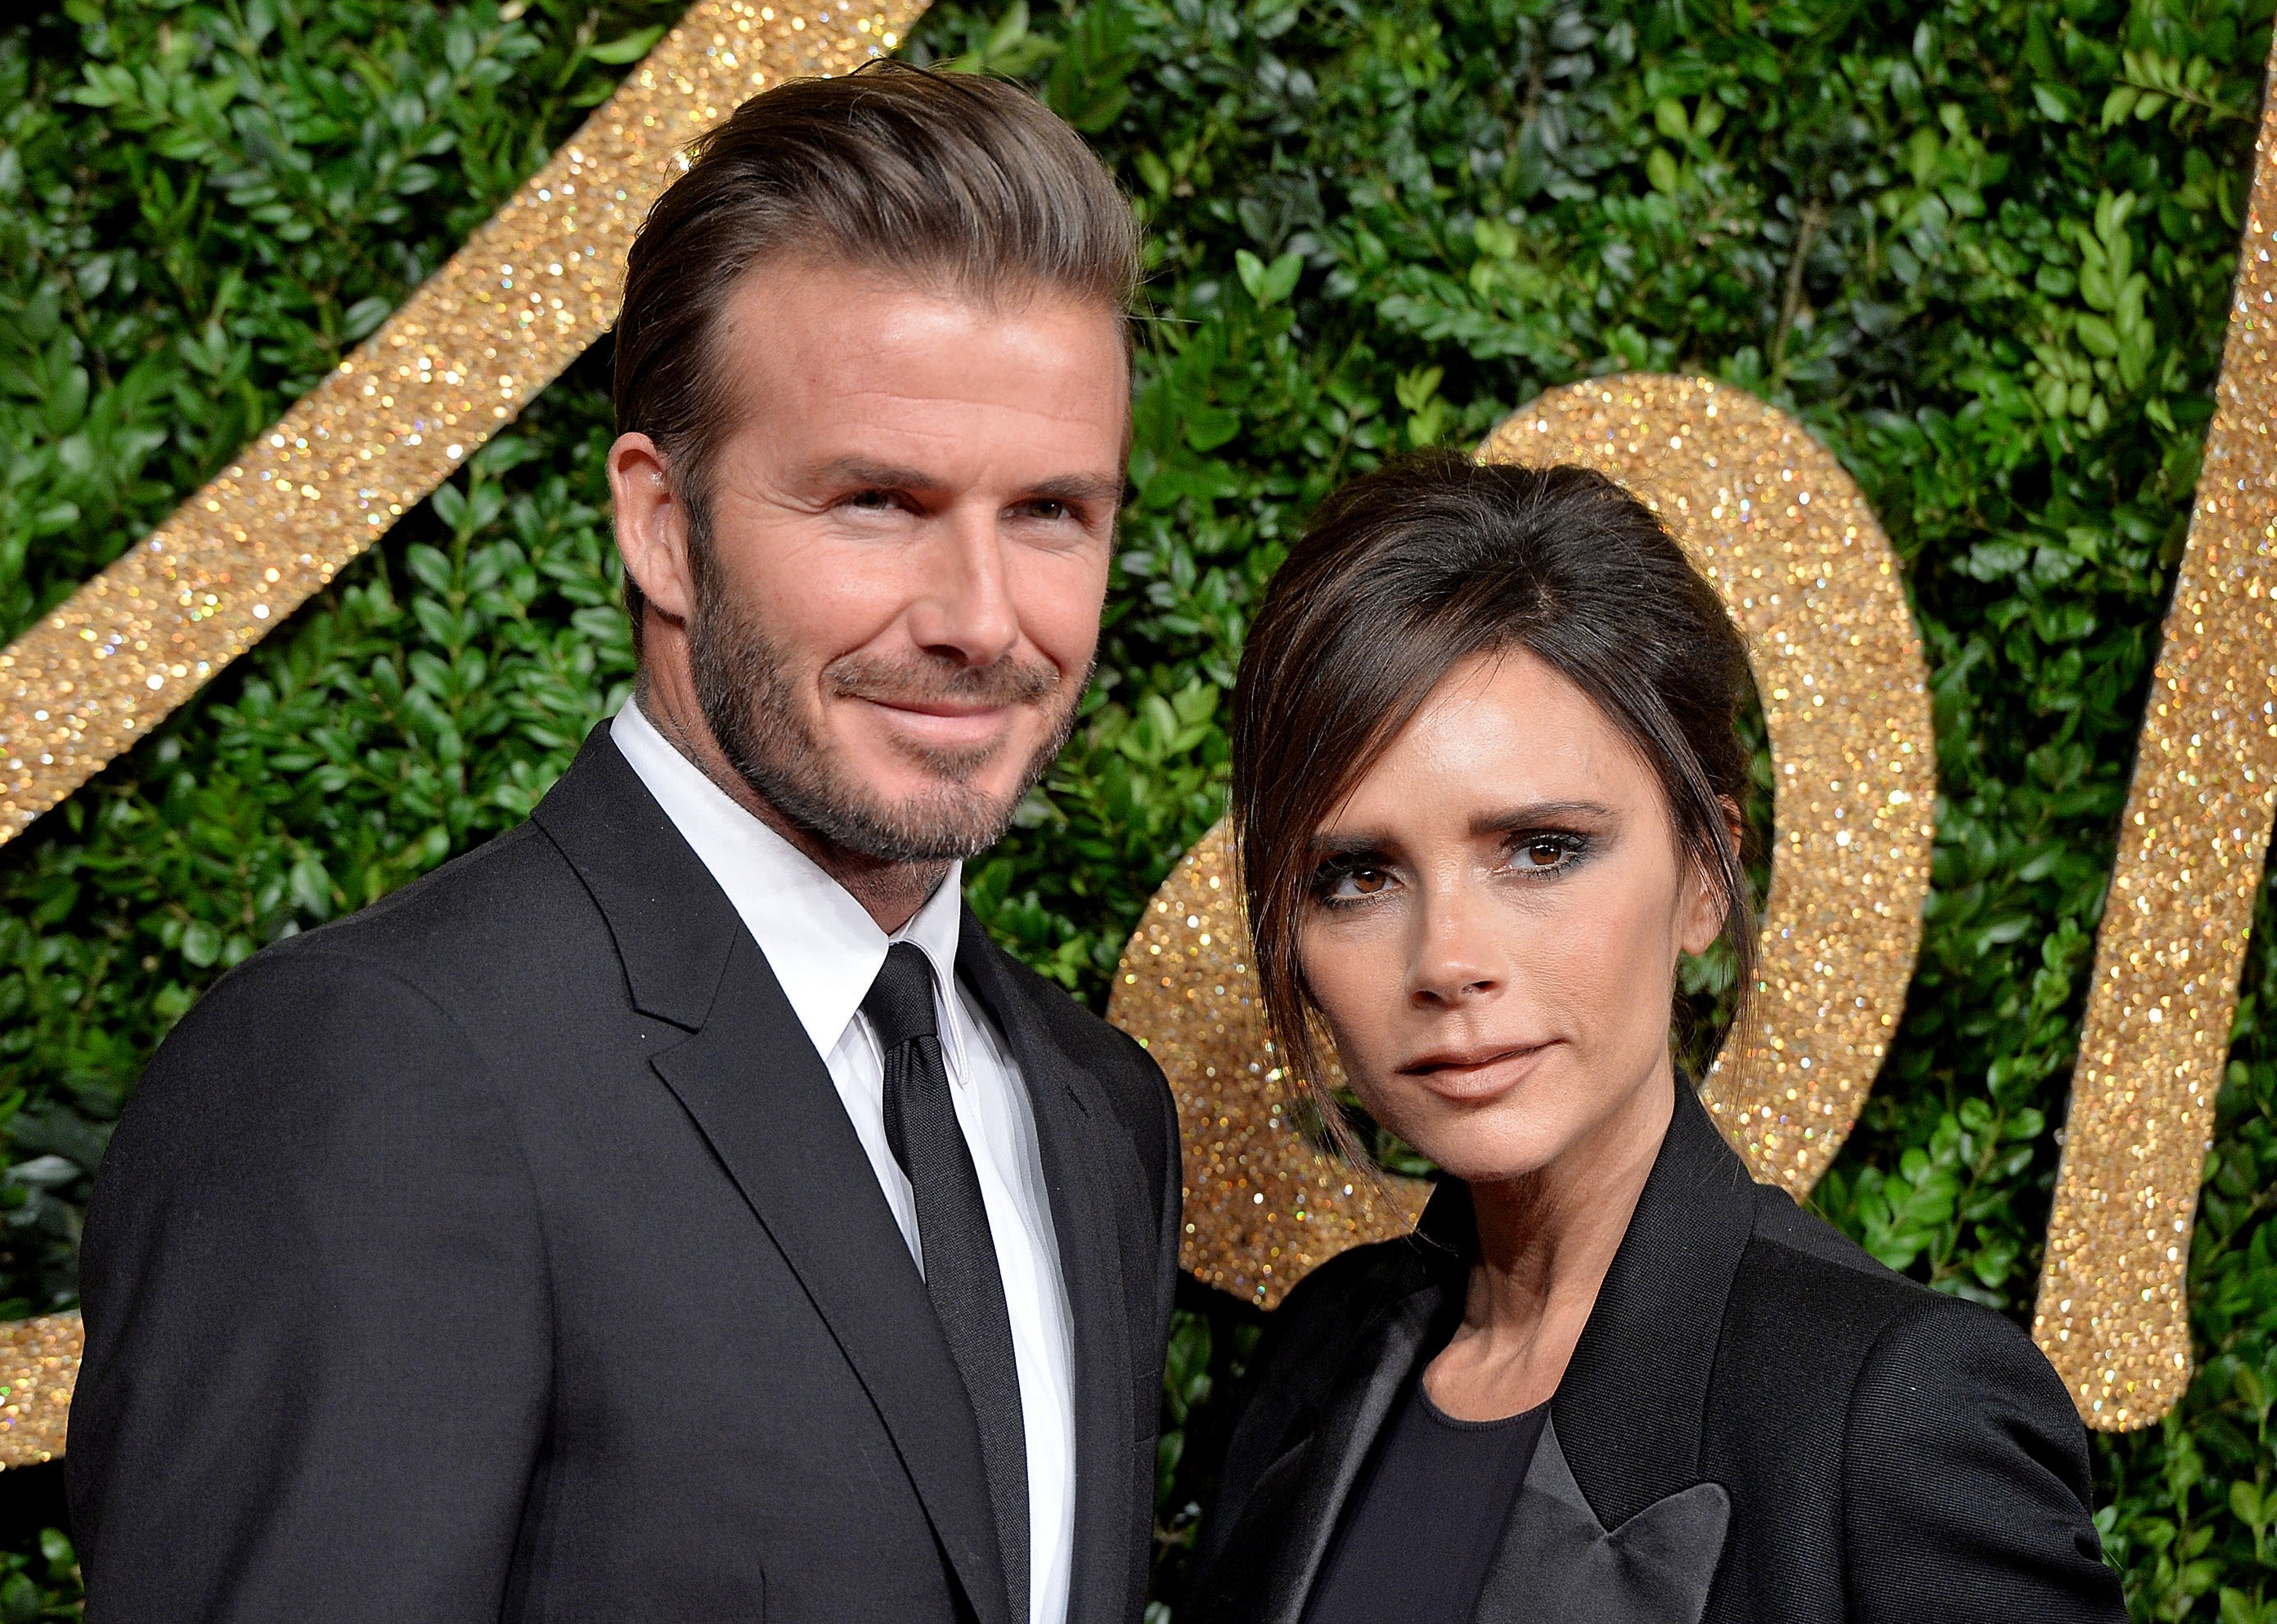 David and Victoria Beckham were asleep in their Holland Park home when a burglar reportedly broke in